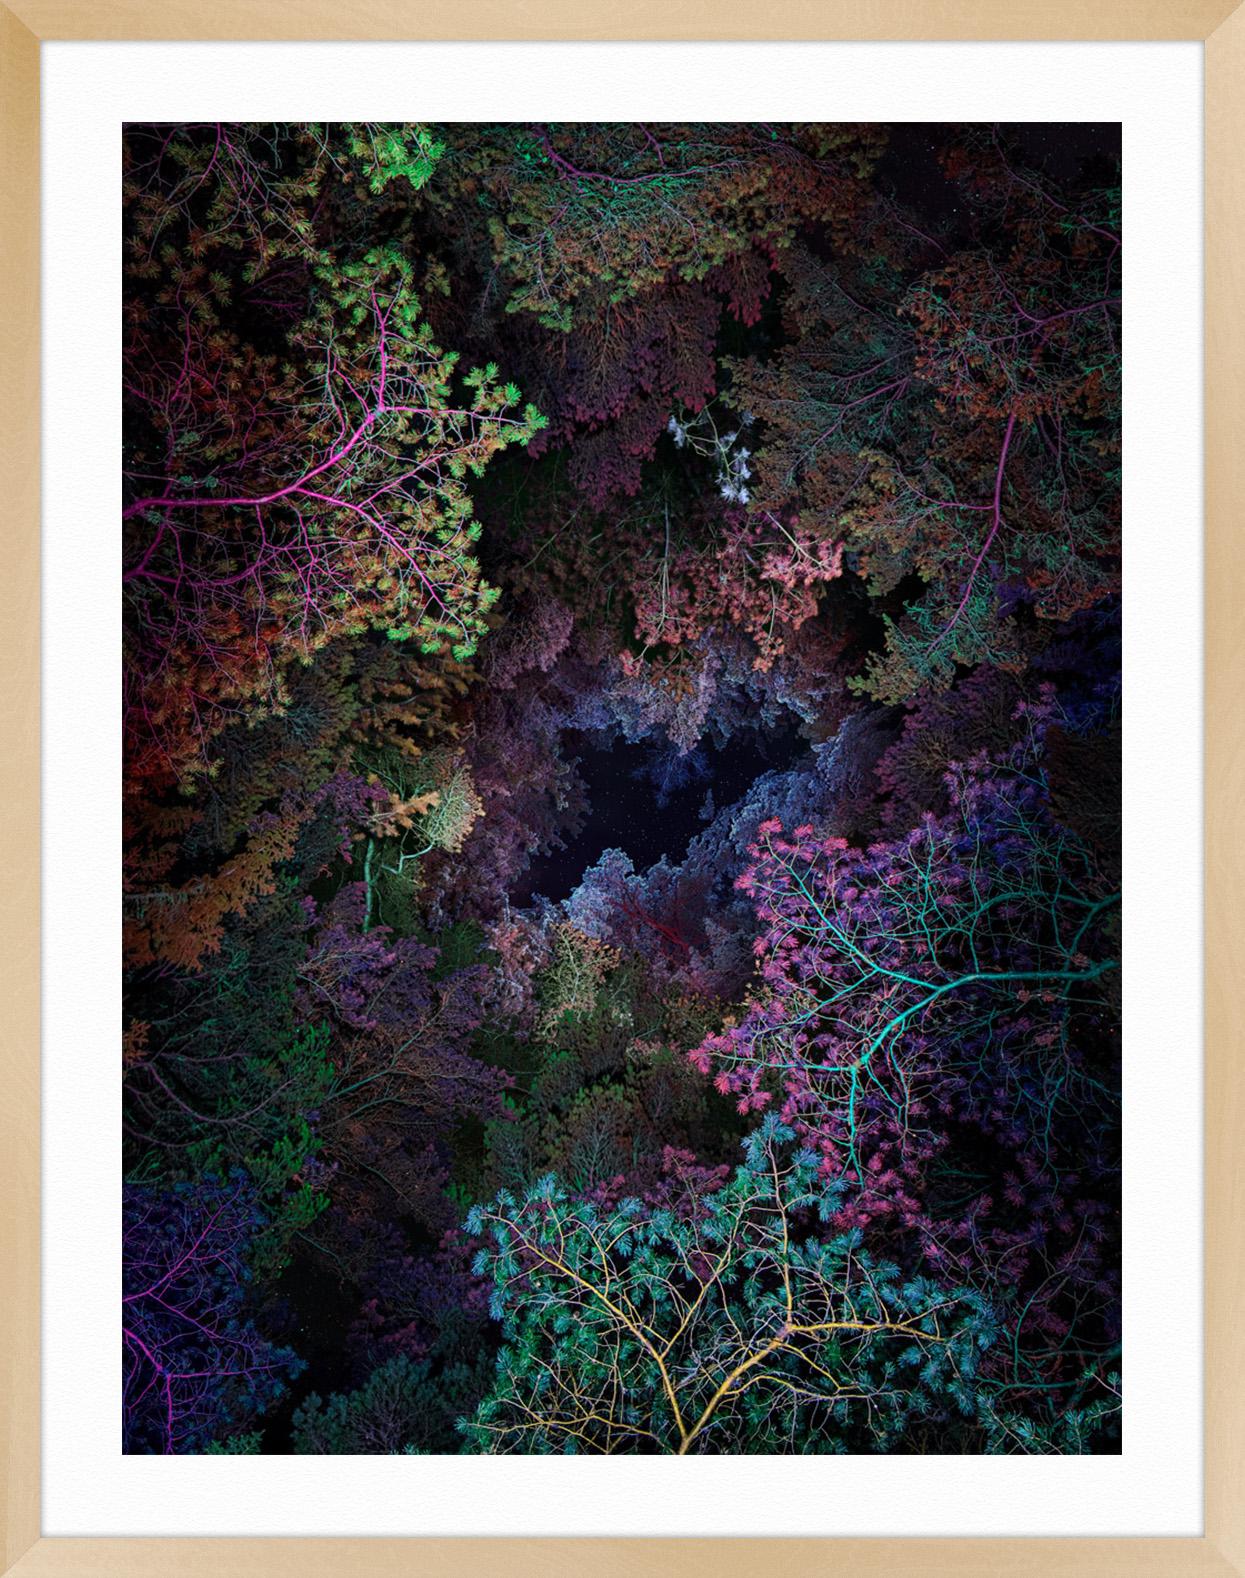 ABOUT THIS ARTIST: Linda Westin, based in Stockholm, left photography and became a Ph.D. in neuroscience specialized in super-resolution fluorescence microscopy.

Then she turned back to photography. Now she looks at forests, rocks, plants, and